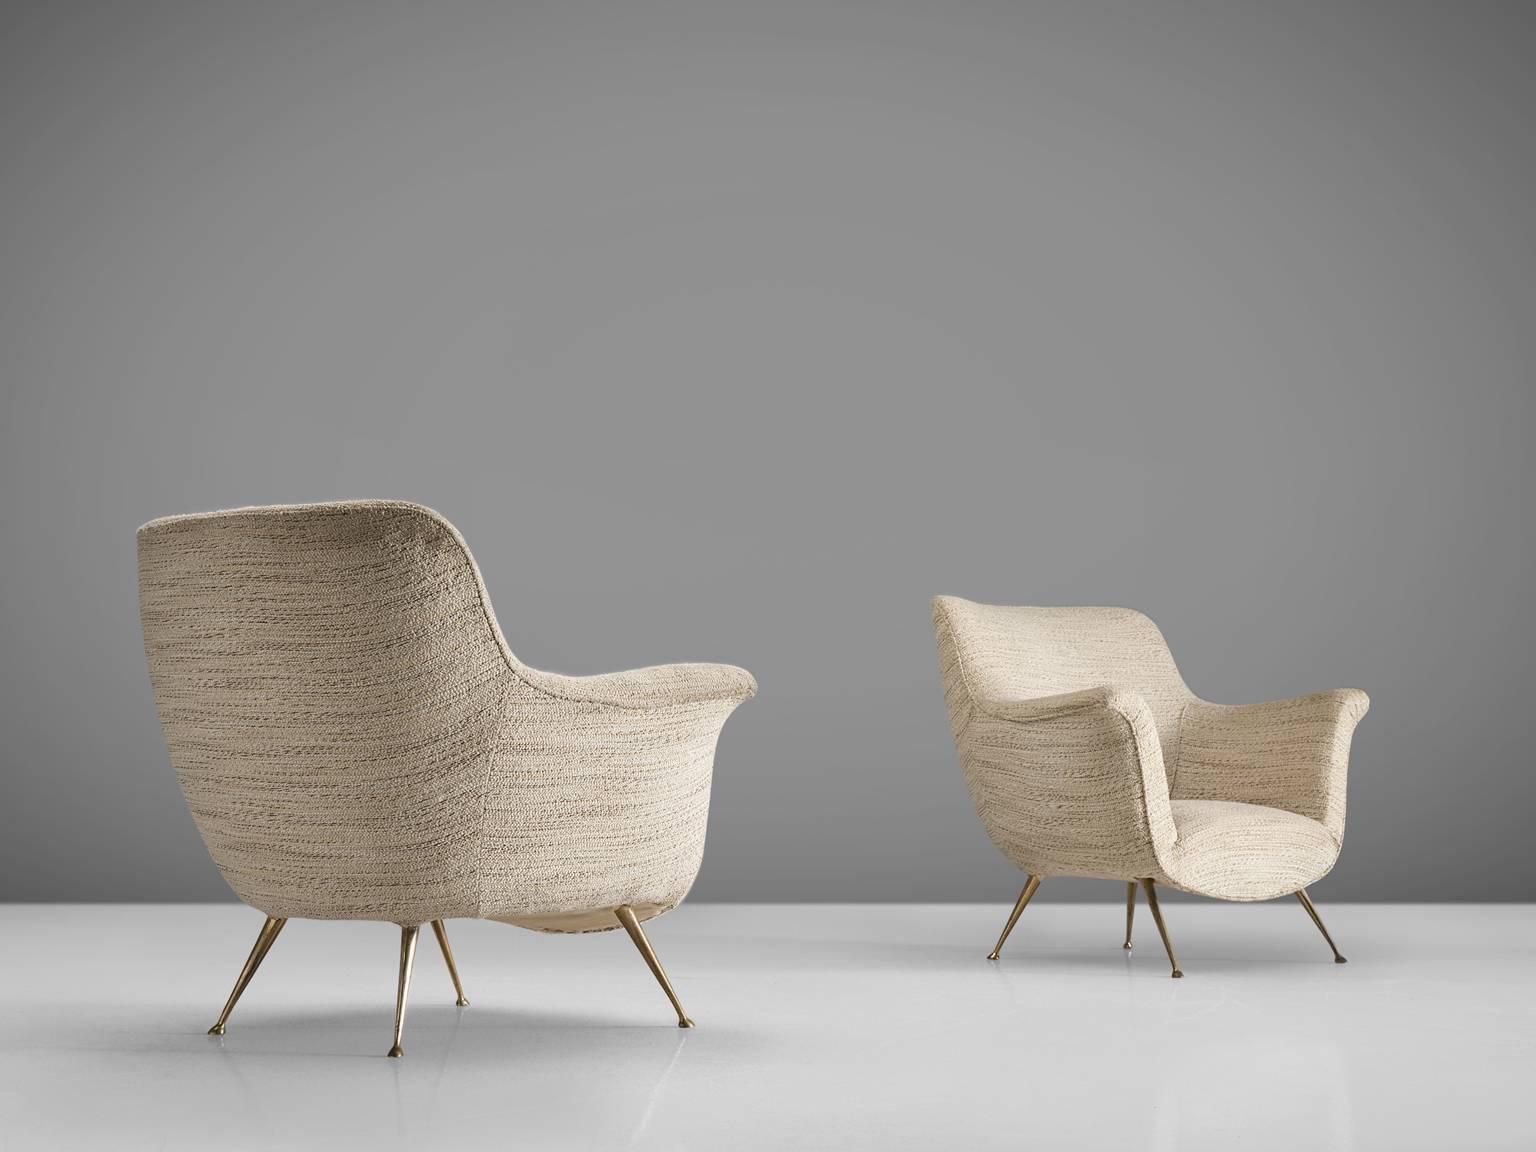 Italian set of lounge chairs, white fabric, brass, Italy, 1950s.

This set of chairs is an iconic example of Italian design from the 1950s. The design is on the one hand simplistic, with elegant, subtle lines. On the other hand the set has a